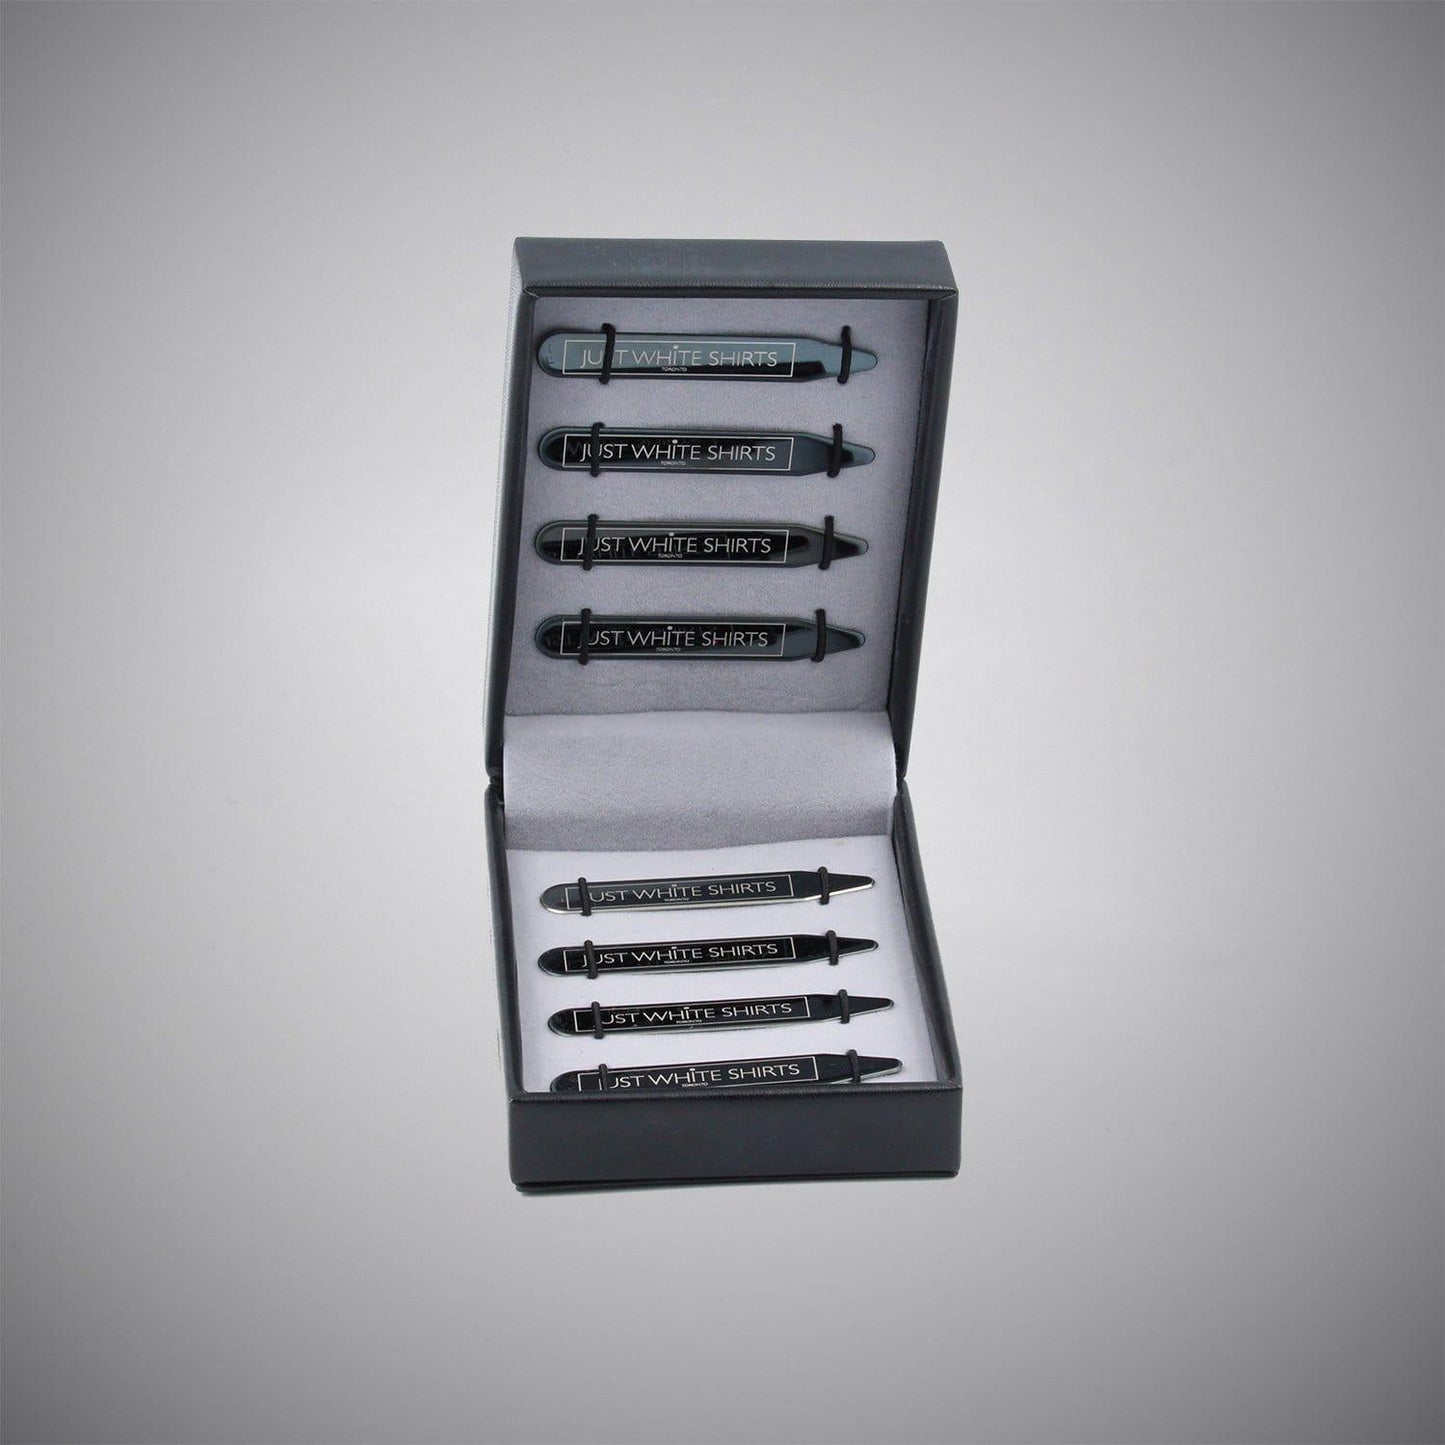 Black Chrome Finish Stainless Steel 8 Piece Collar Stay Box Set - Just White Shirts